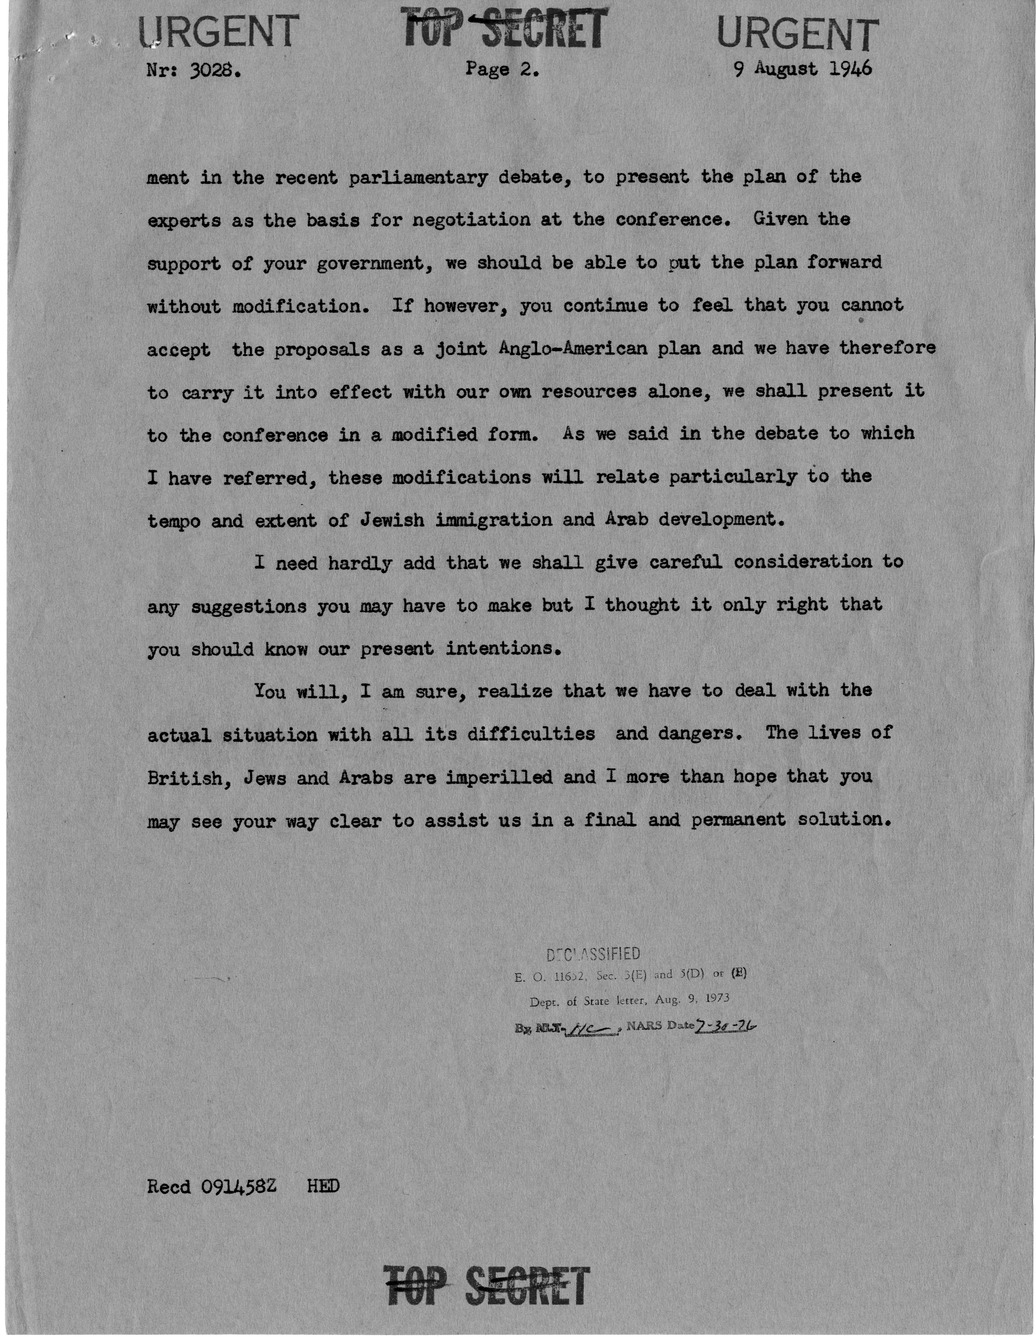 Correspondence Between President Harry S. Truman and Prime Minister Clement Attlee